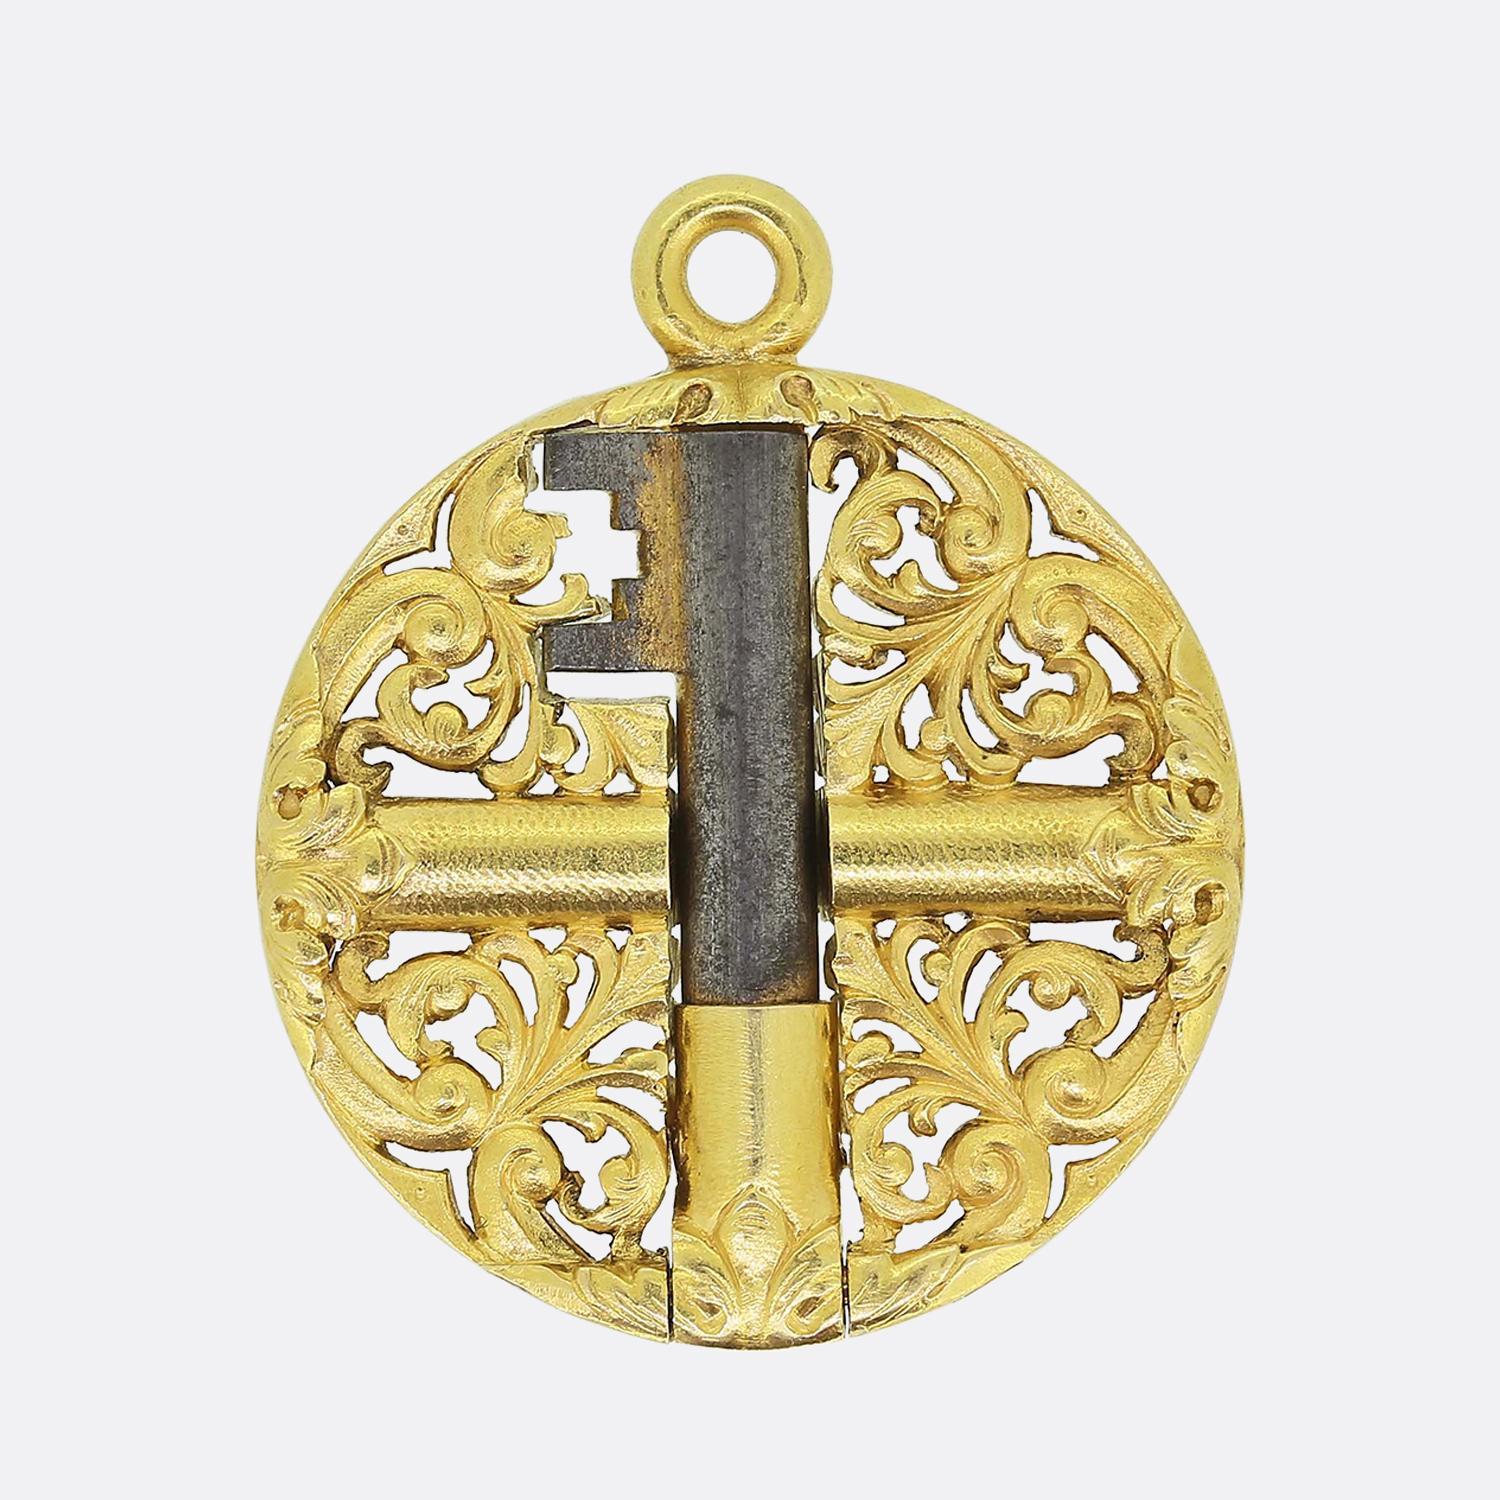 Here we have a marvellous creation taken from the Victorian period. This antique piece has been crafted from a rich 18ct yellow gold into the form of a watch key; a tool used as a mechanical winder on any spring driven device. However, this